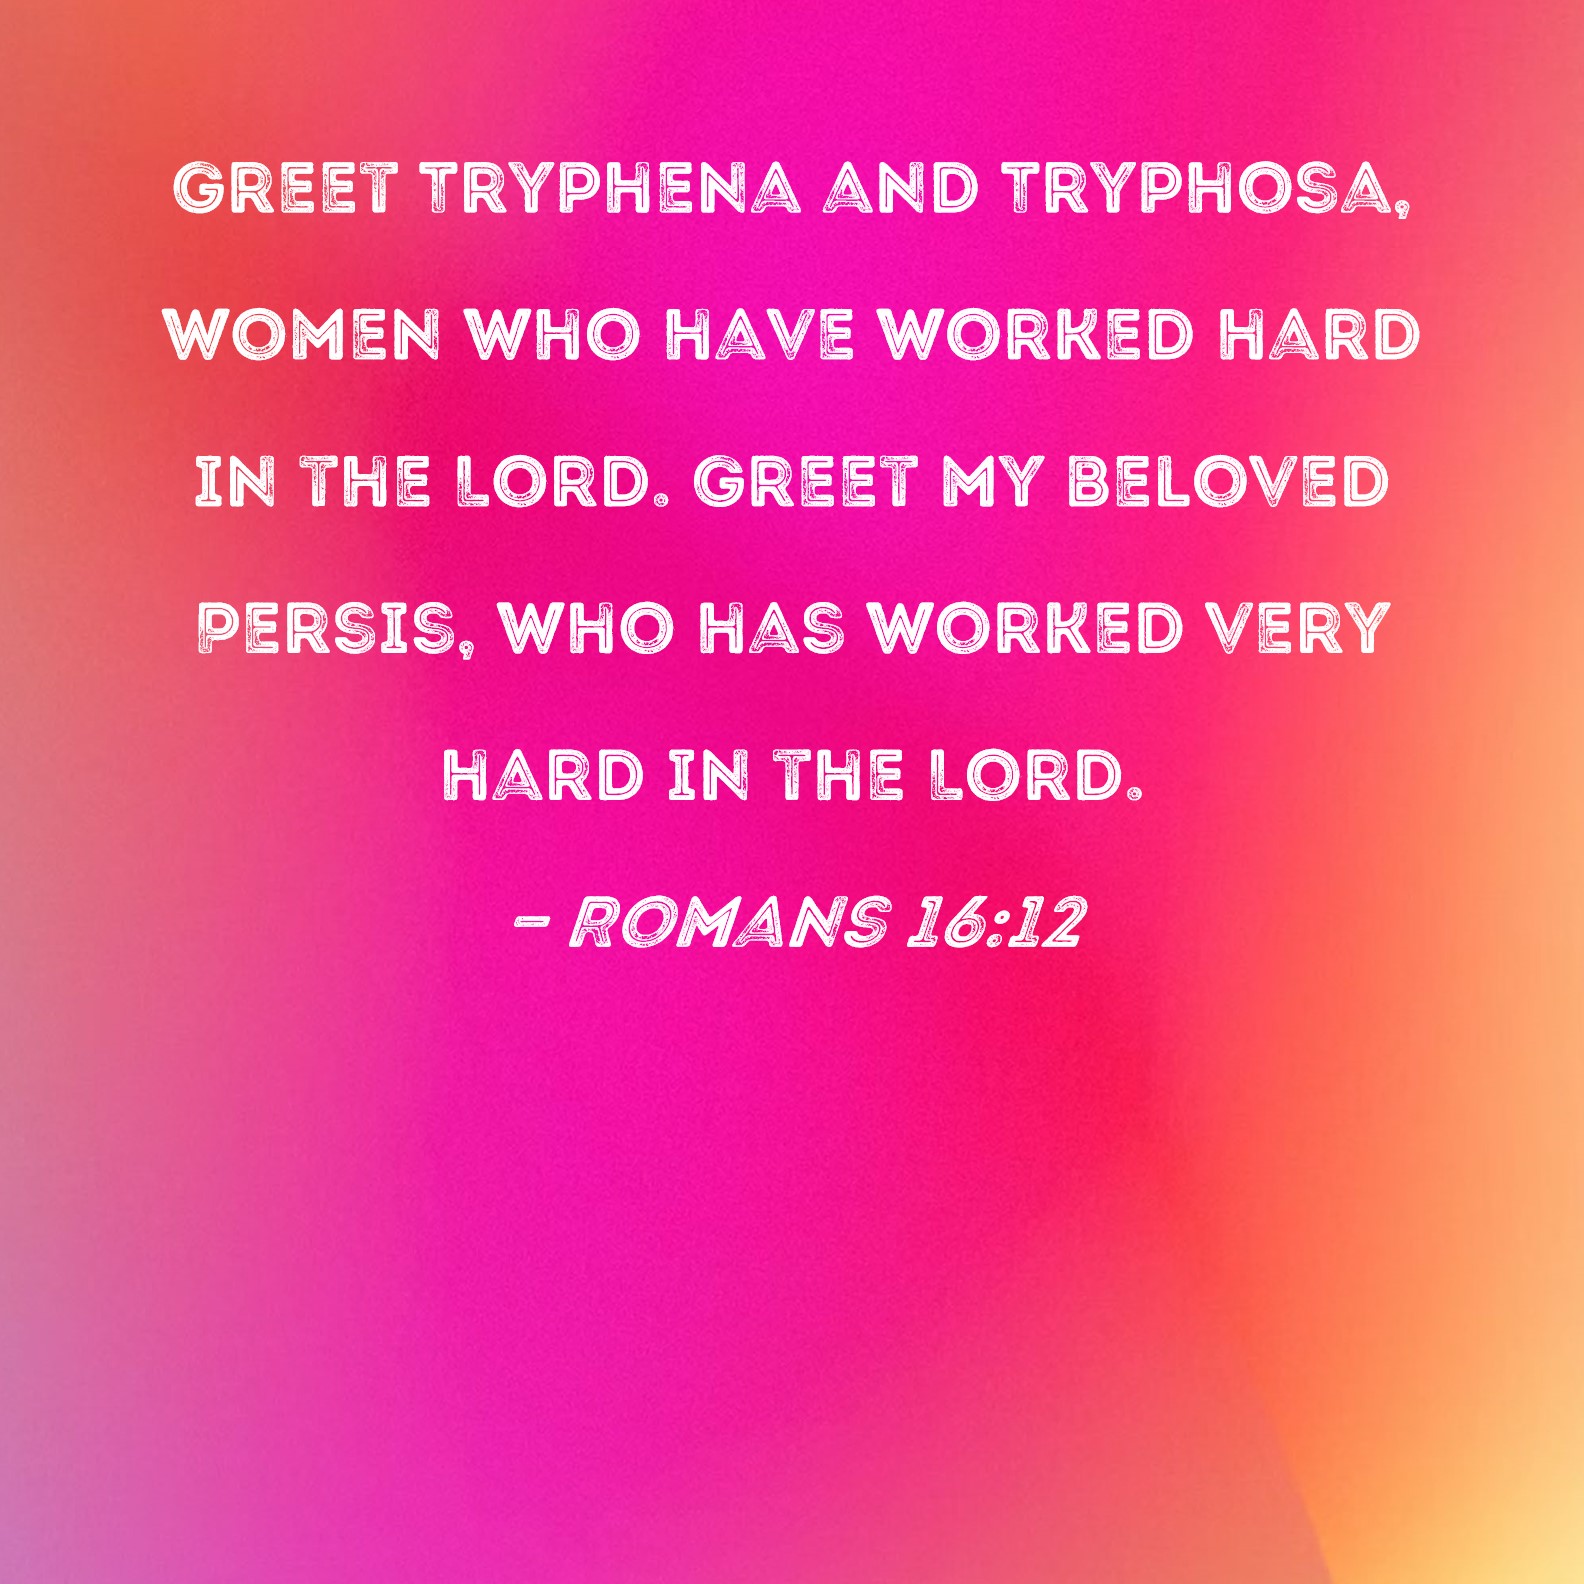 Romans 1612 Greet Tryphena and Tryphosa, women who have worked hard in